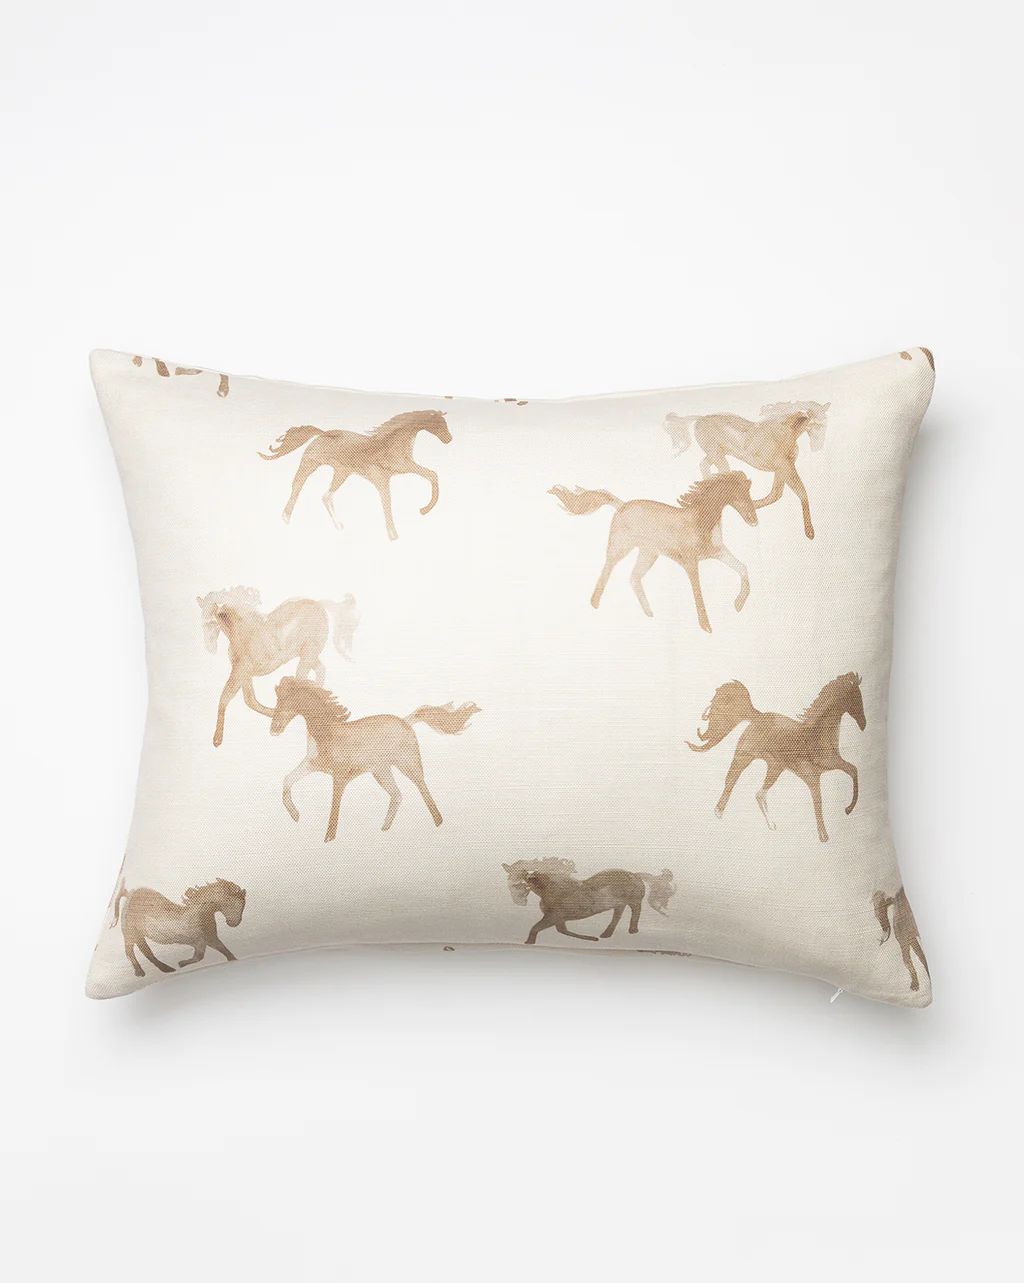 Watercolor Horses Pillow Cover | McGee & Co.